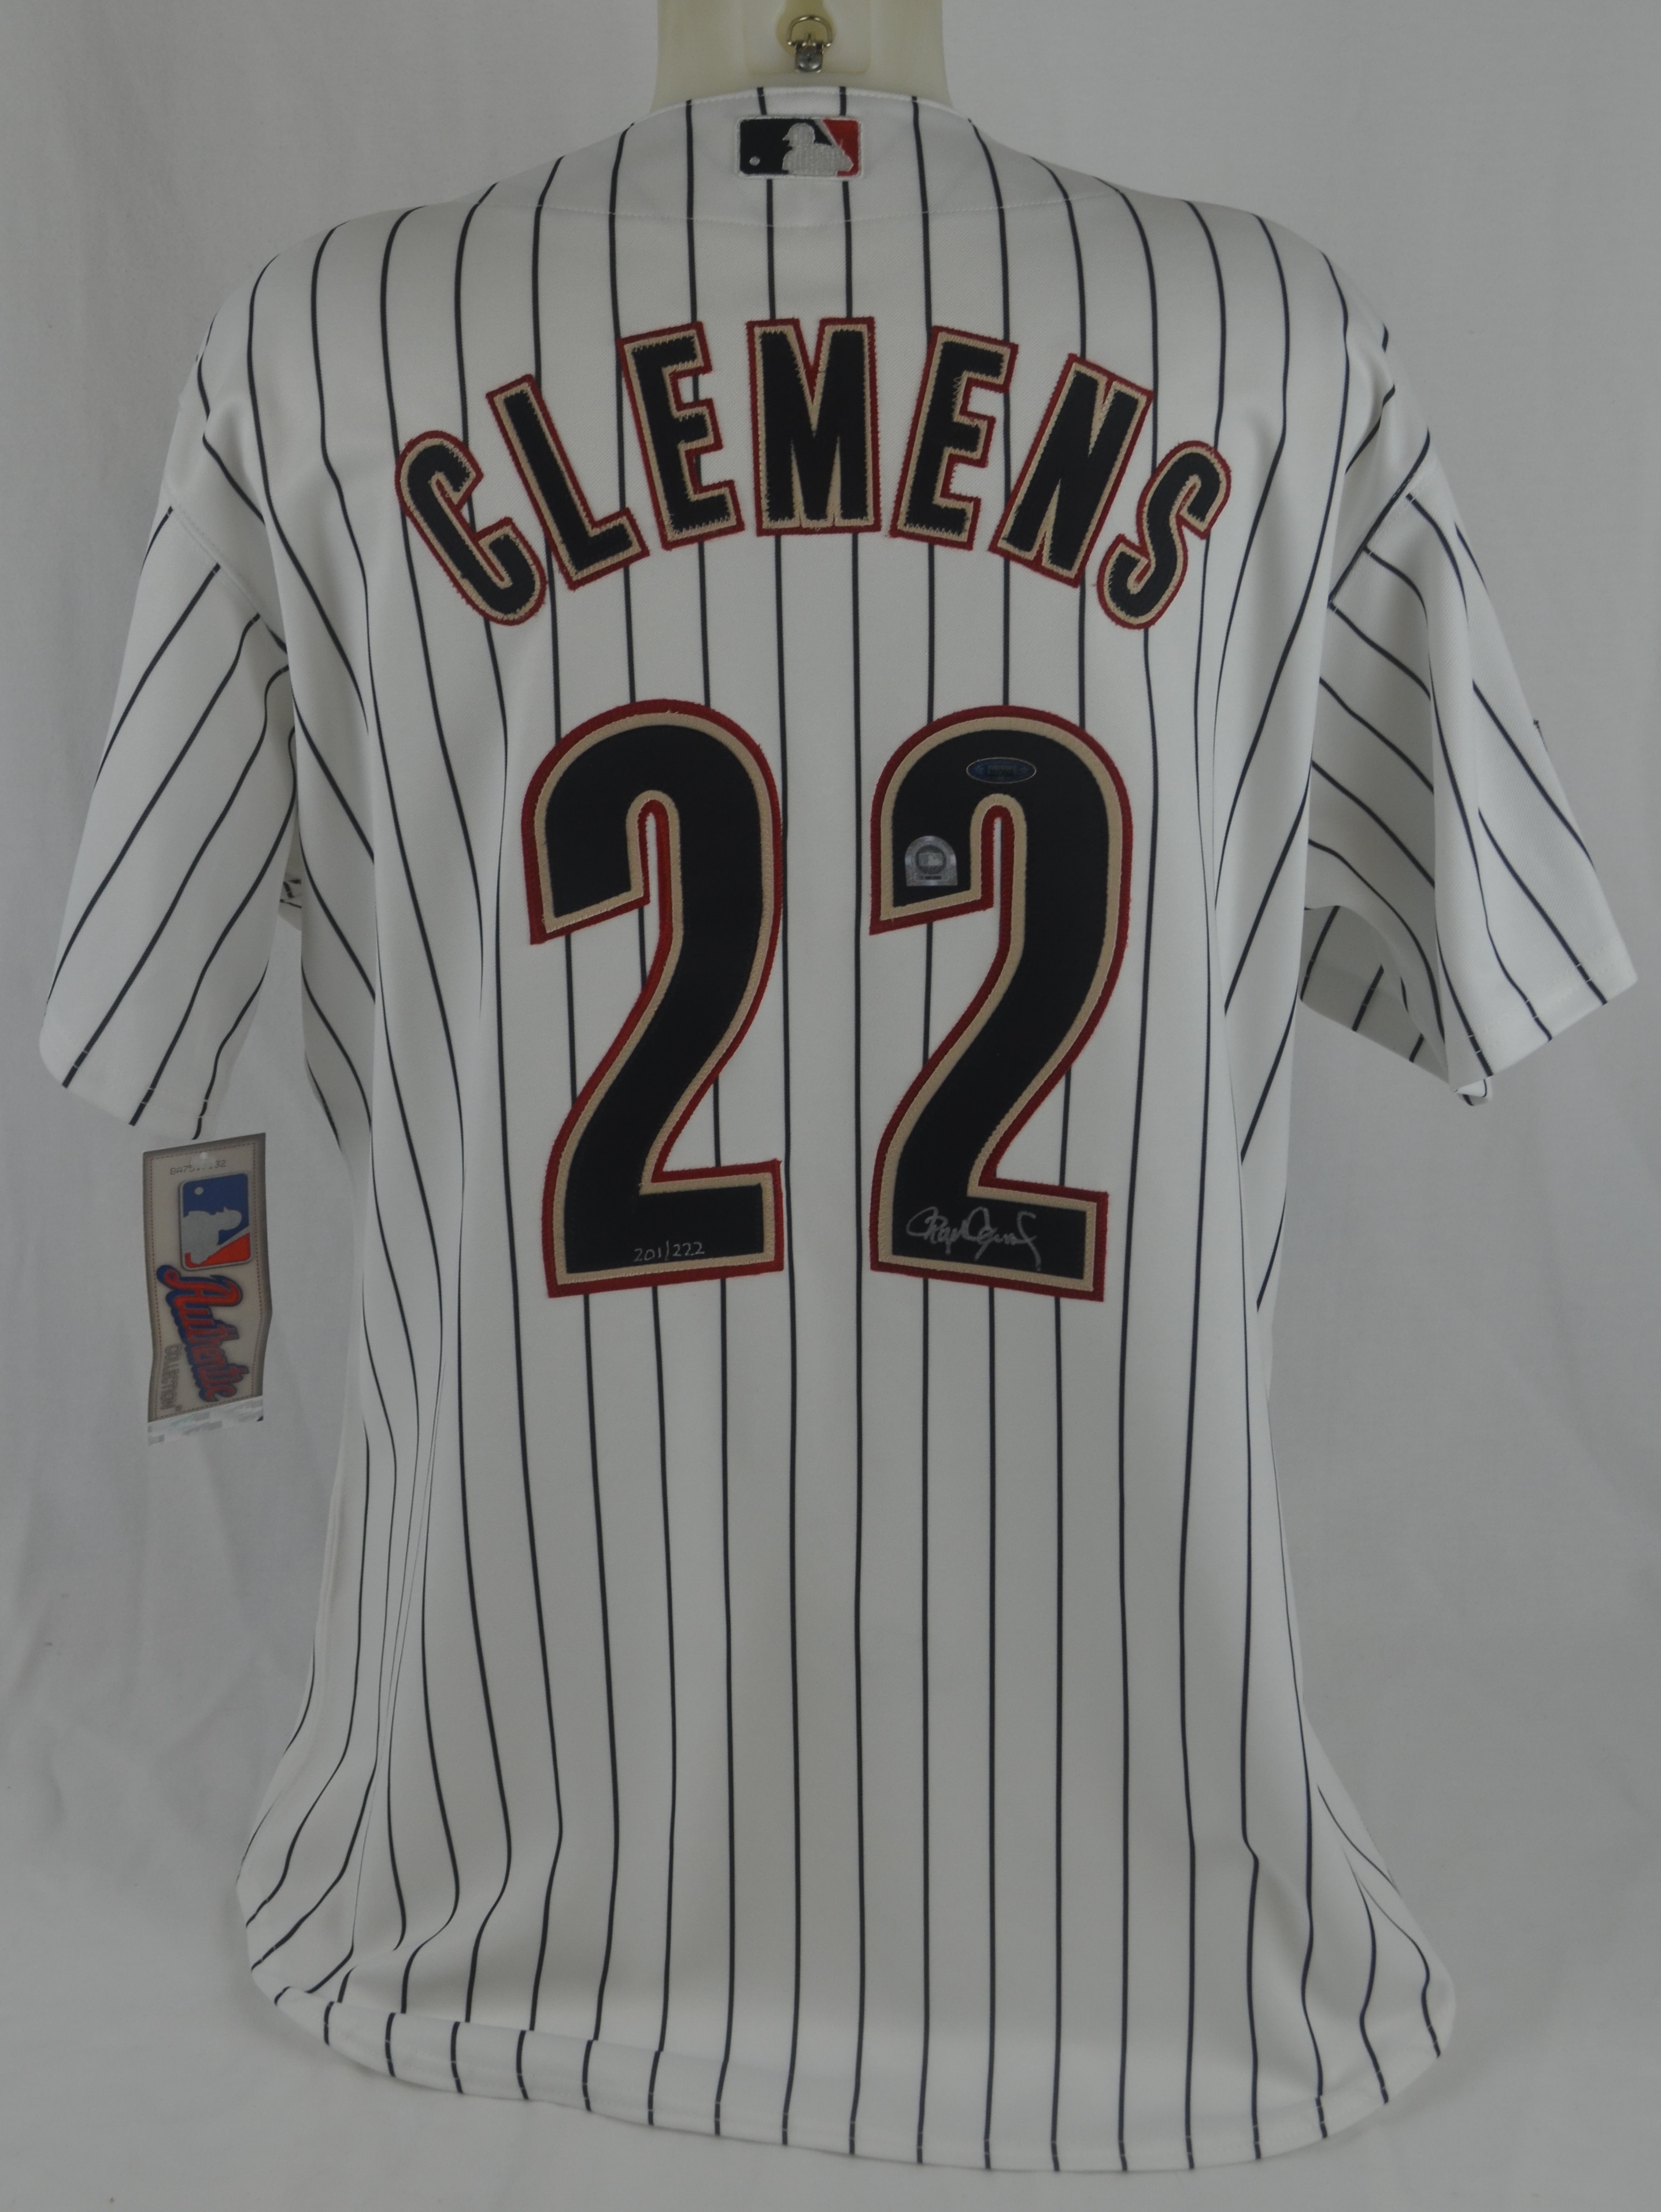 roger clemens autographed jersey